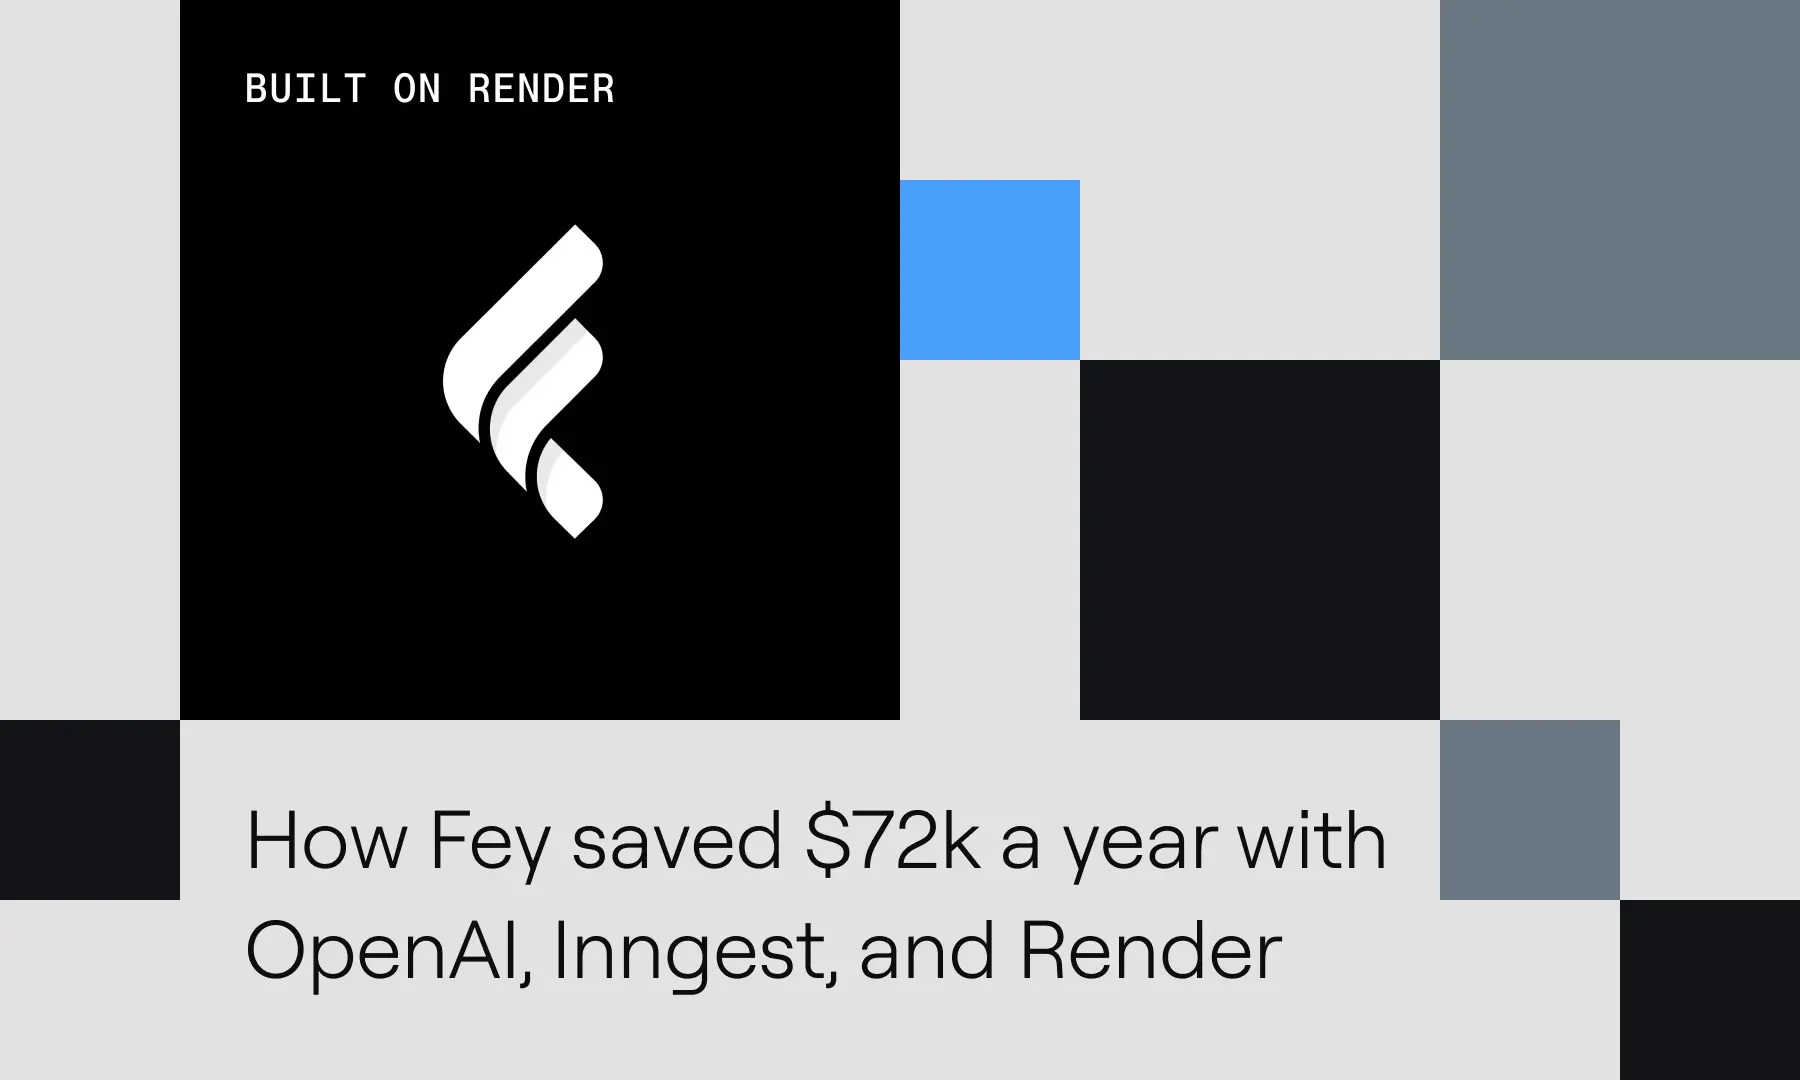 How Fey saved $72k a year by migrating to OpenAI, Inngest, and Render